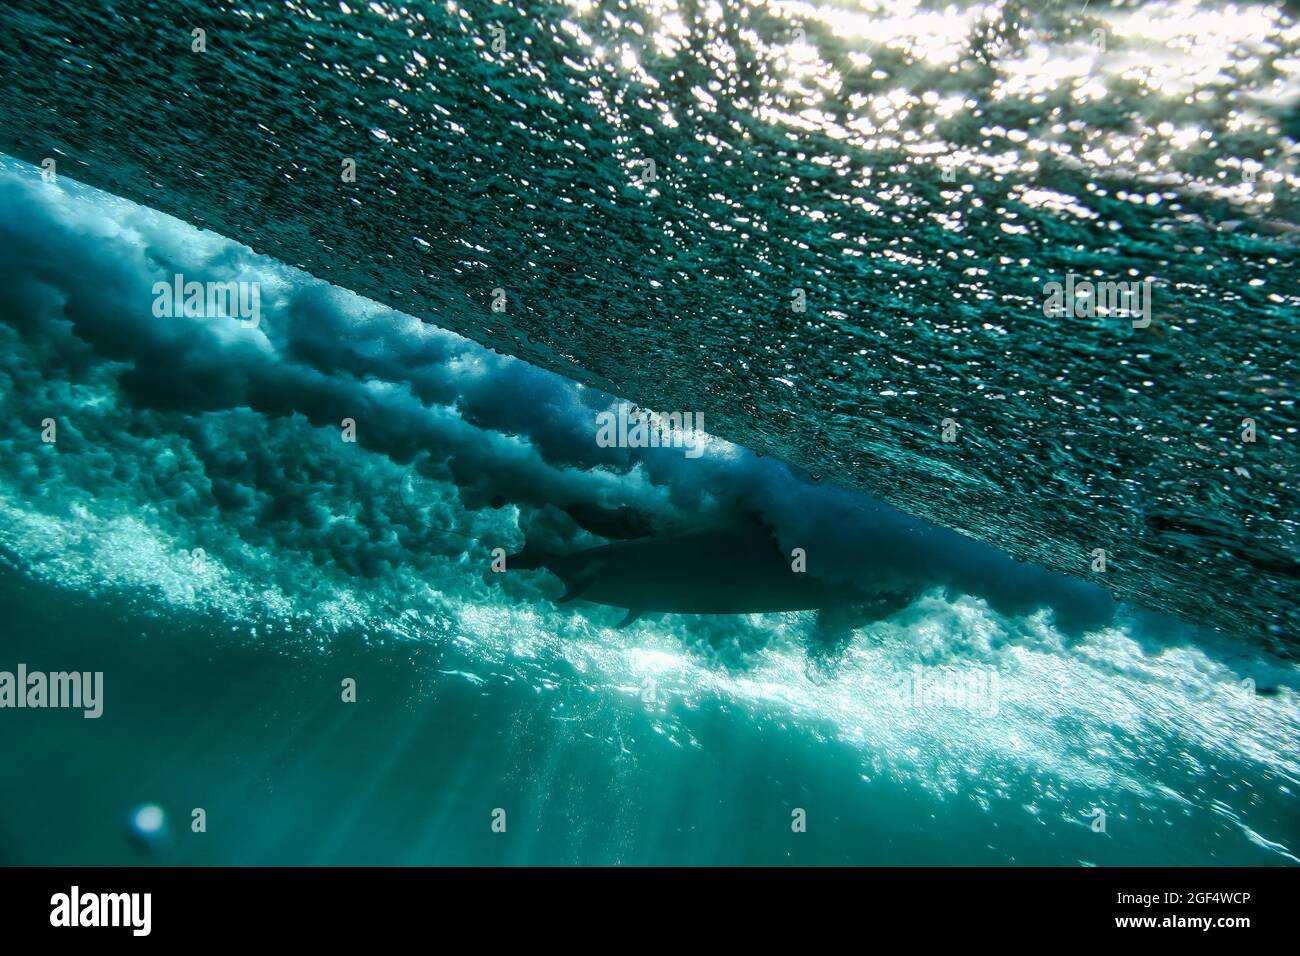 Underwater view of young man surfing in turquoise waters of South Male Atoll Stock Photo